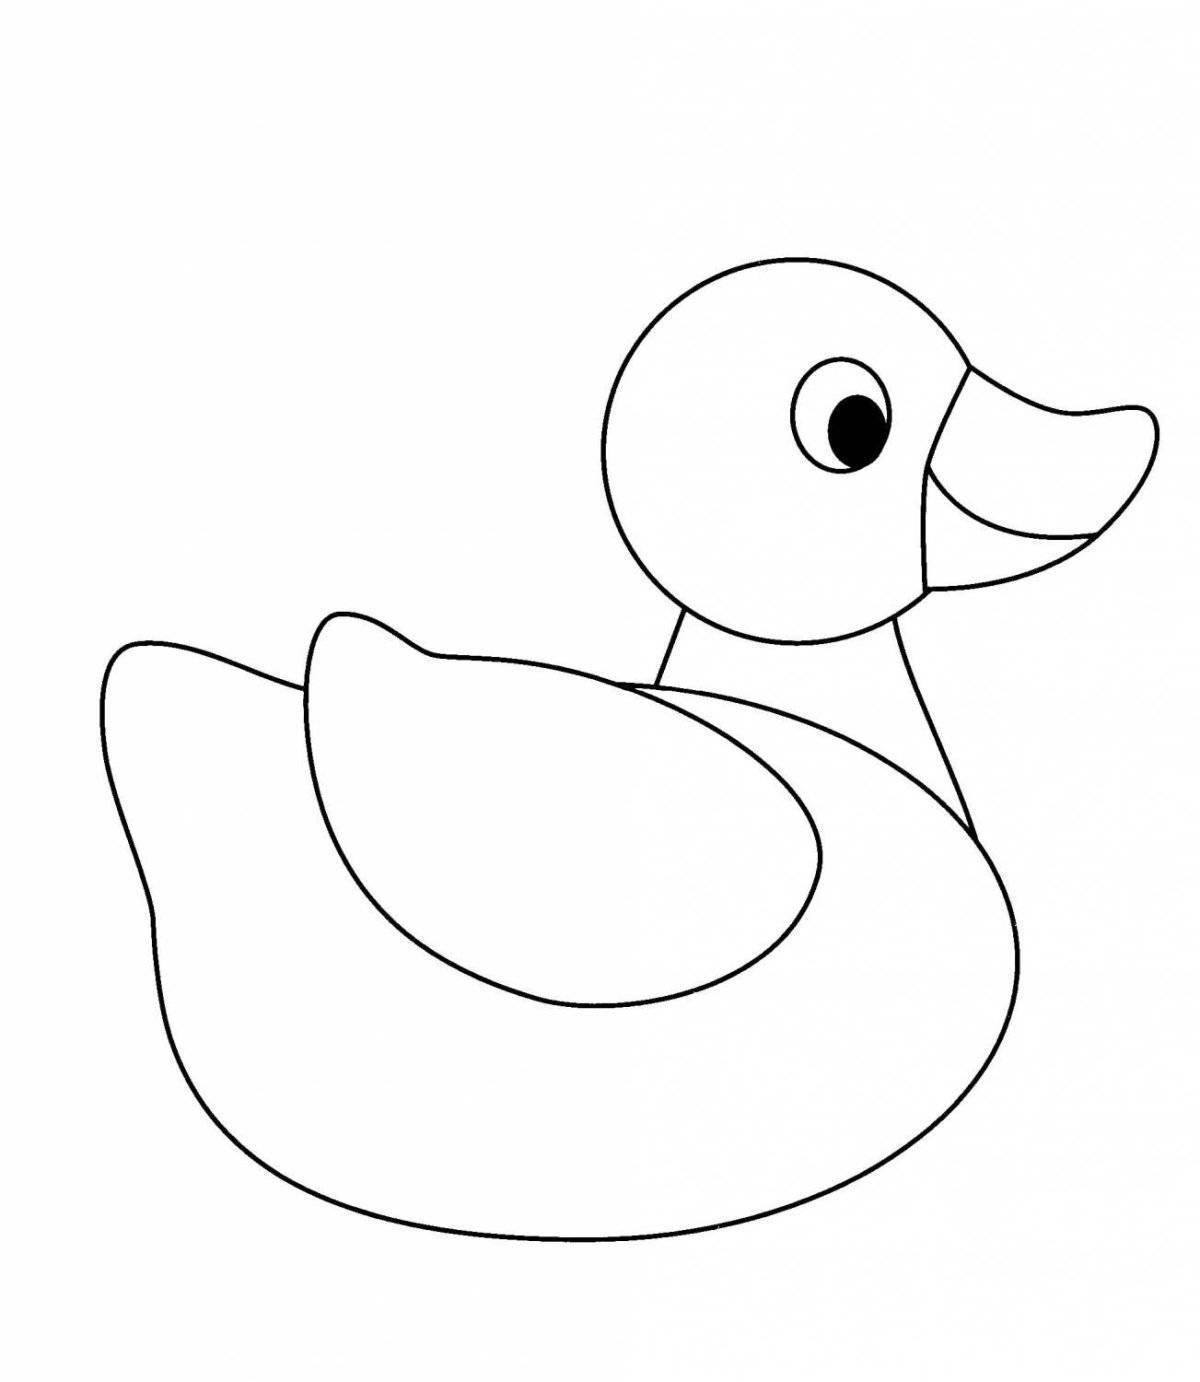 Color-dynamic coloring Dymkovo duck for children 3-4 years old